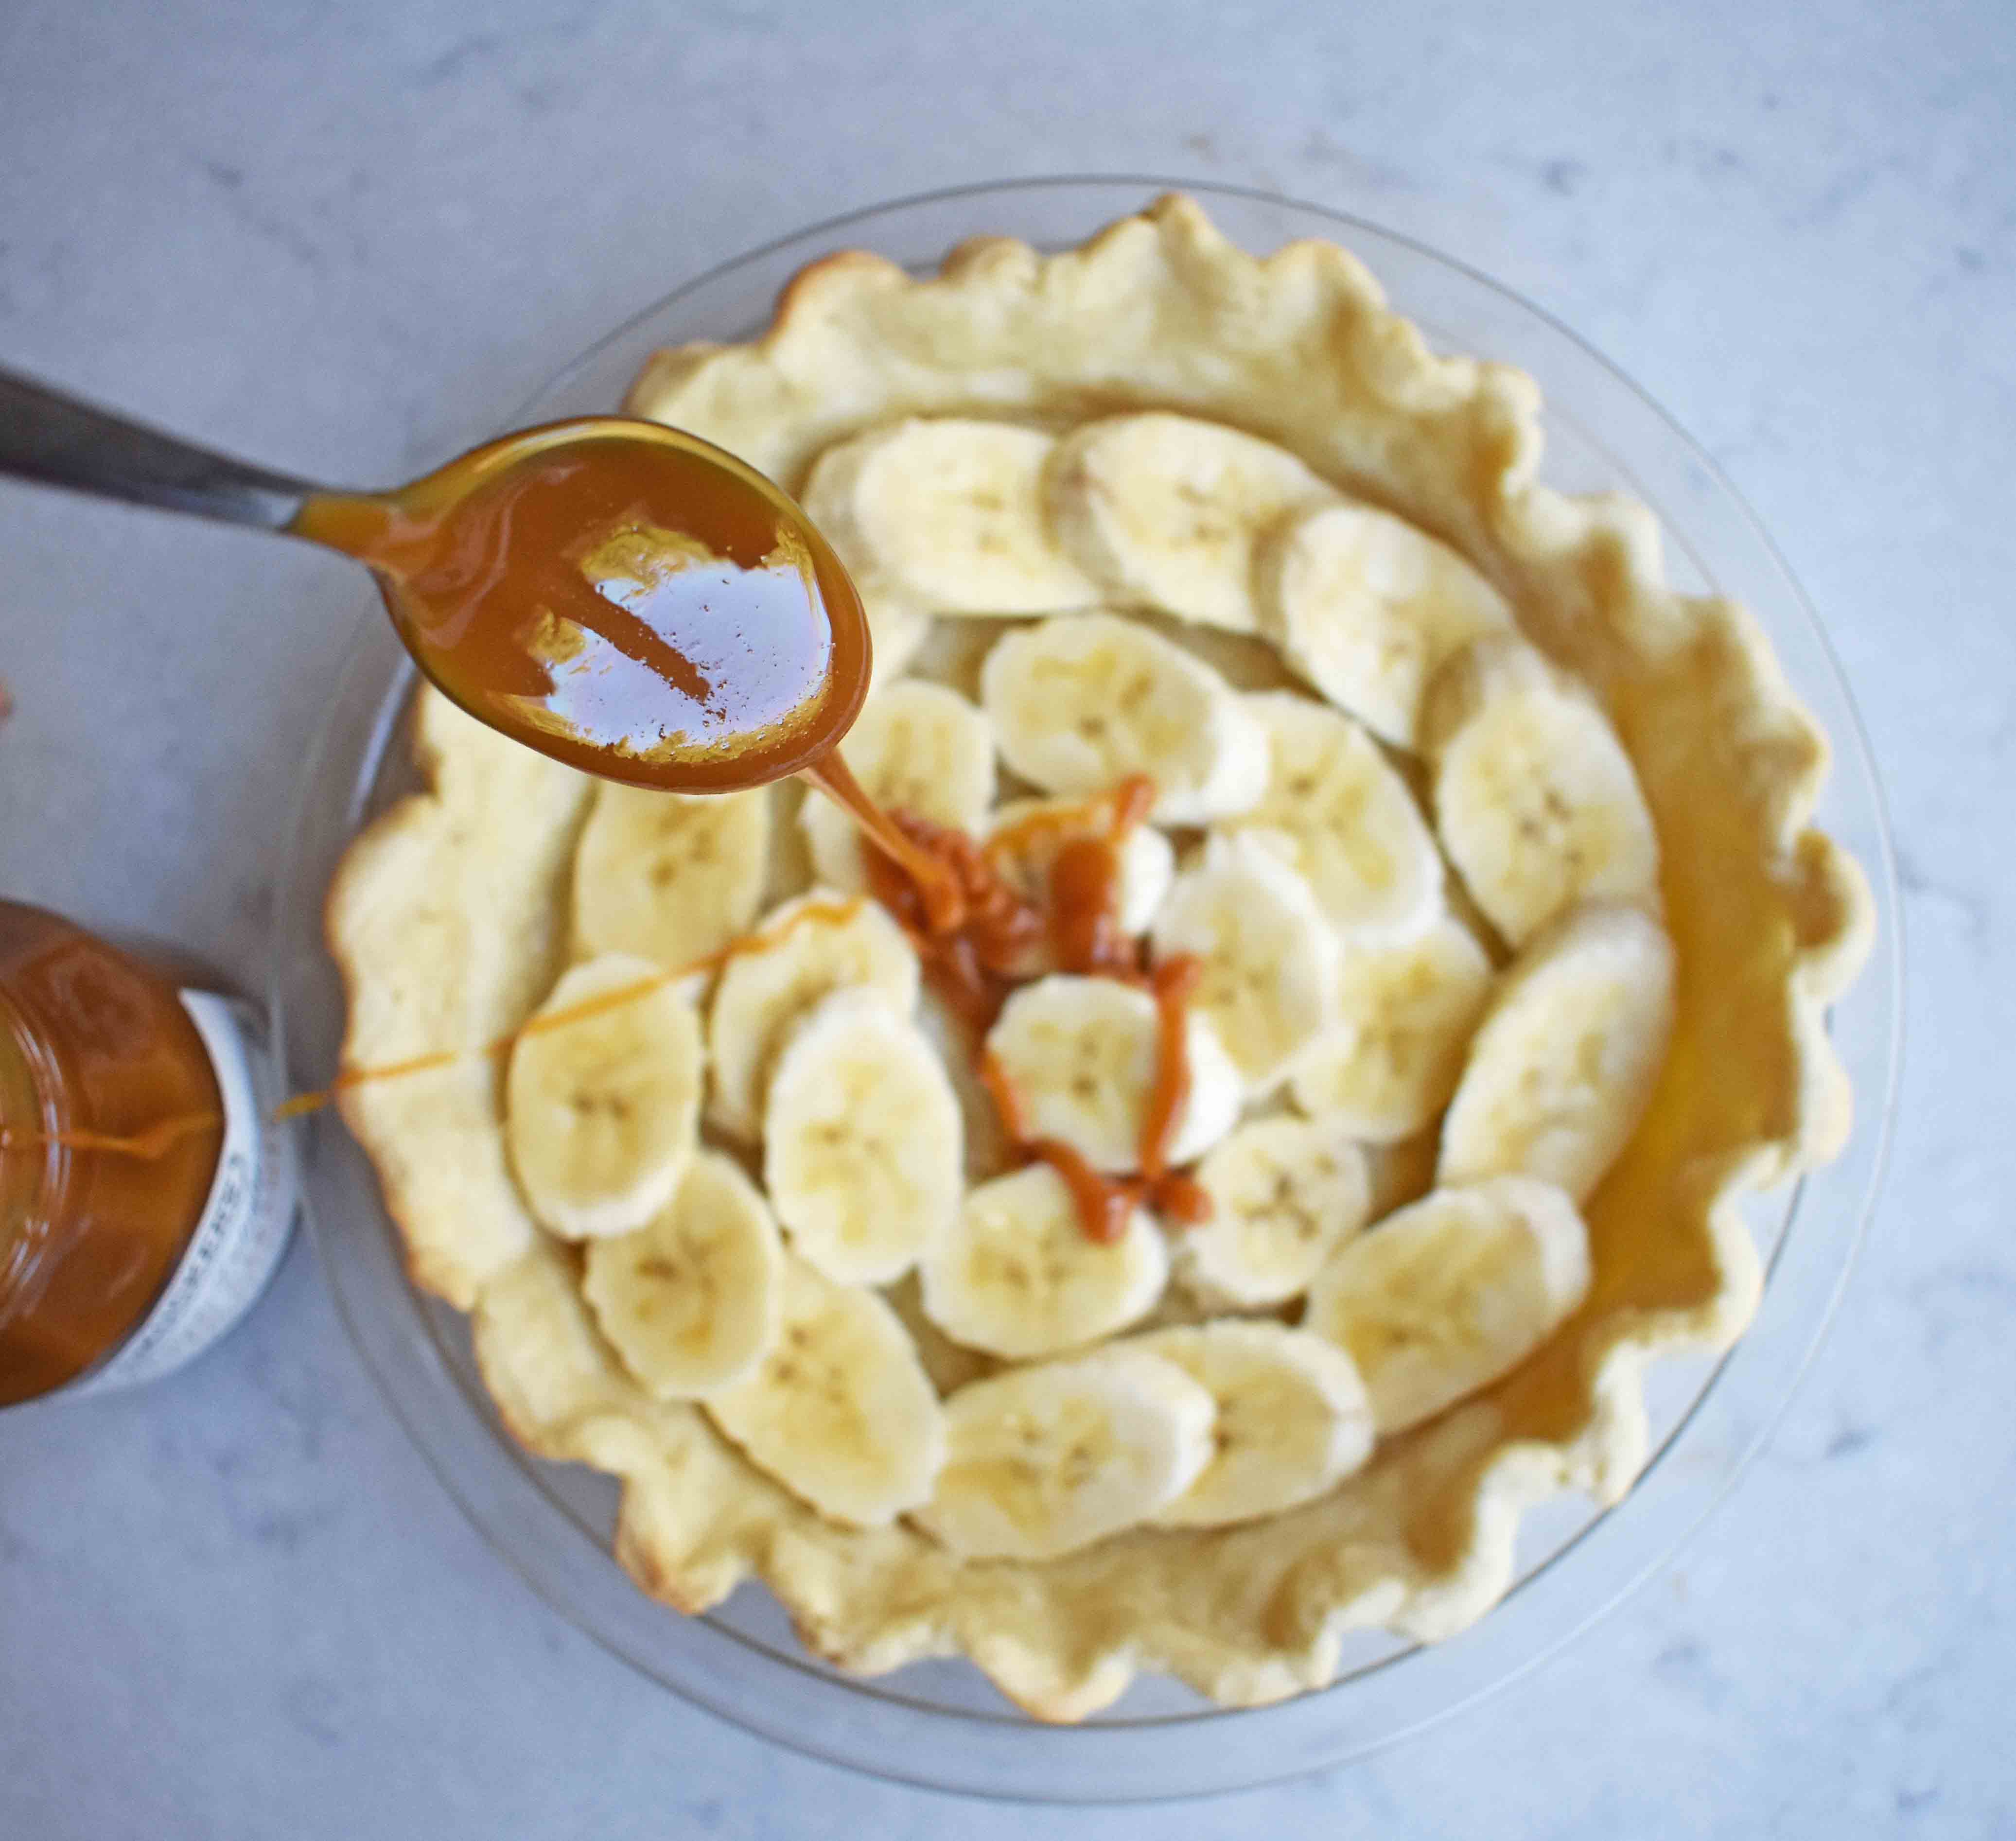 Salted Caramel Banana Cream Pie. Sweet Homemade Custard topped with fresh bananas, handcrafted salted caramel, and sweetened whipped cream all on a flaky, buttery crust. 